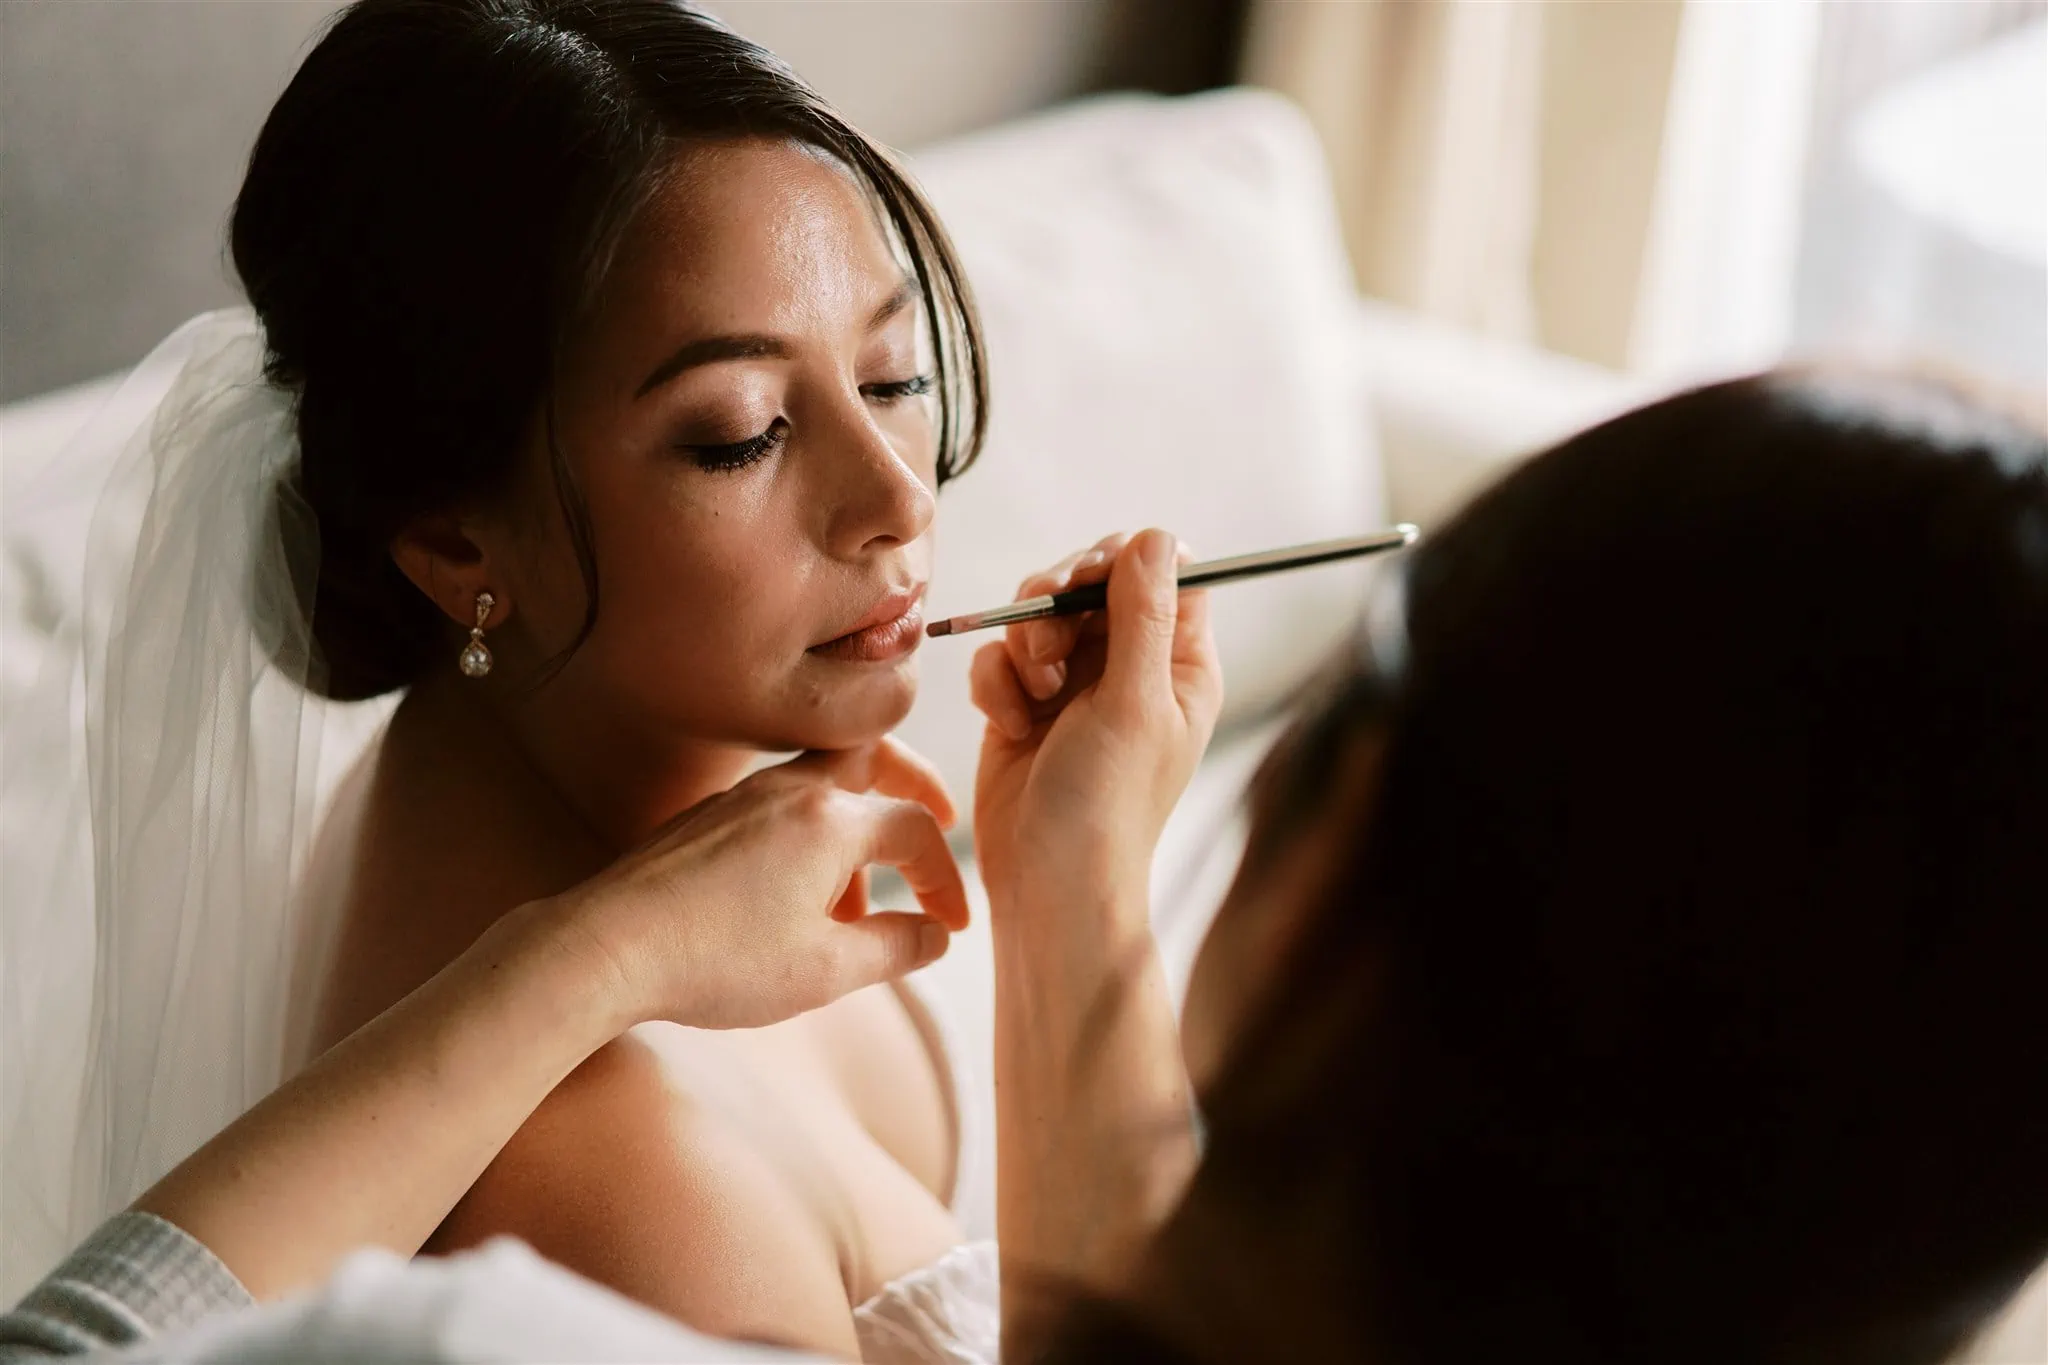 Queenstown Elopement Heli Wedding Photographer クイーンズタウン結婚式 | Mariah, a makeup artist in Queenstown, expertly applies makeup on a radiant bride as she prepares for her special day.